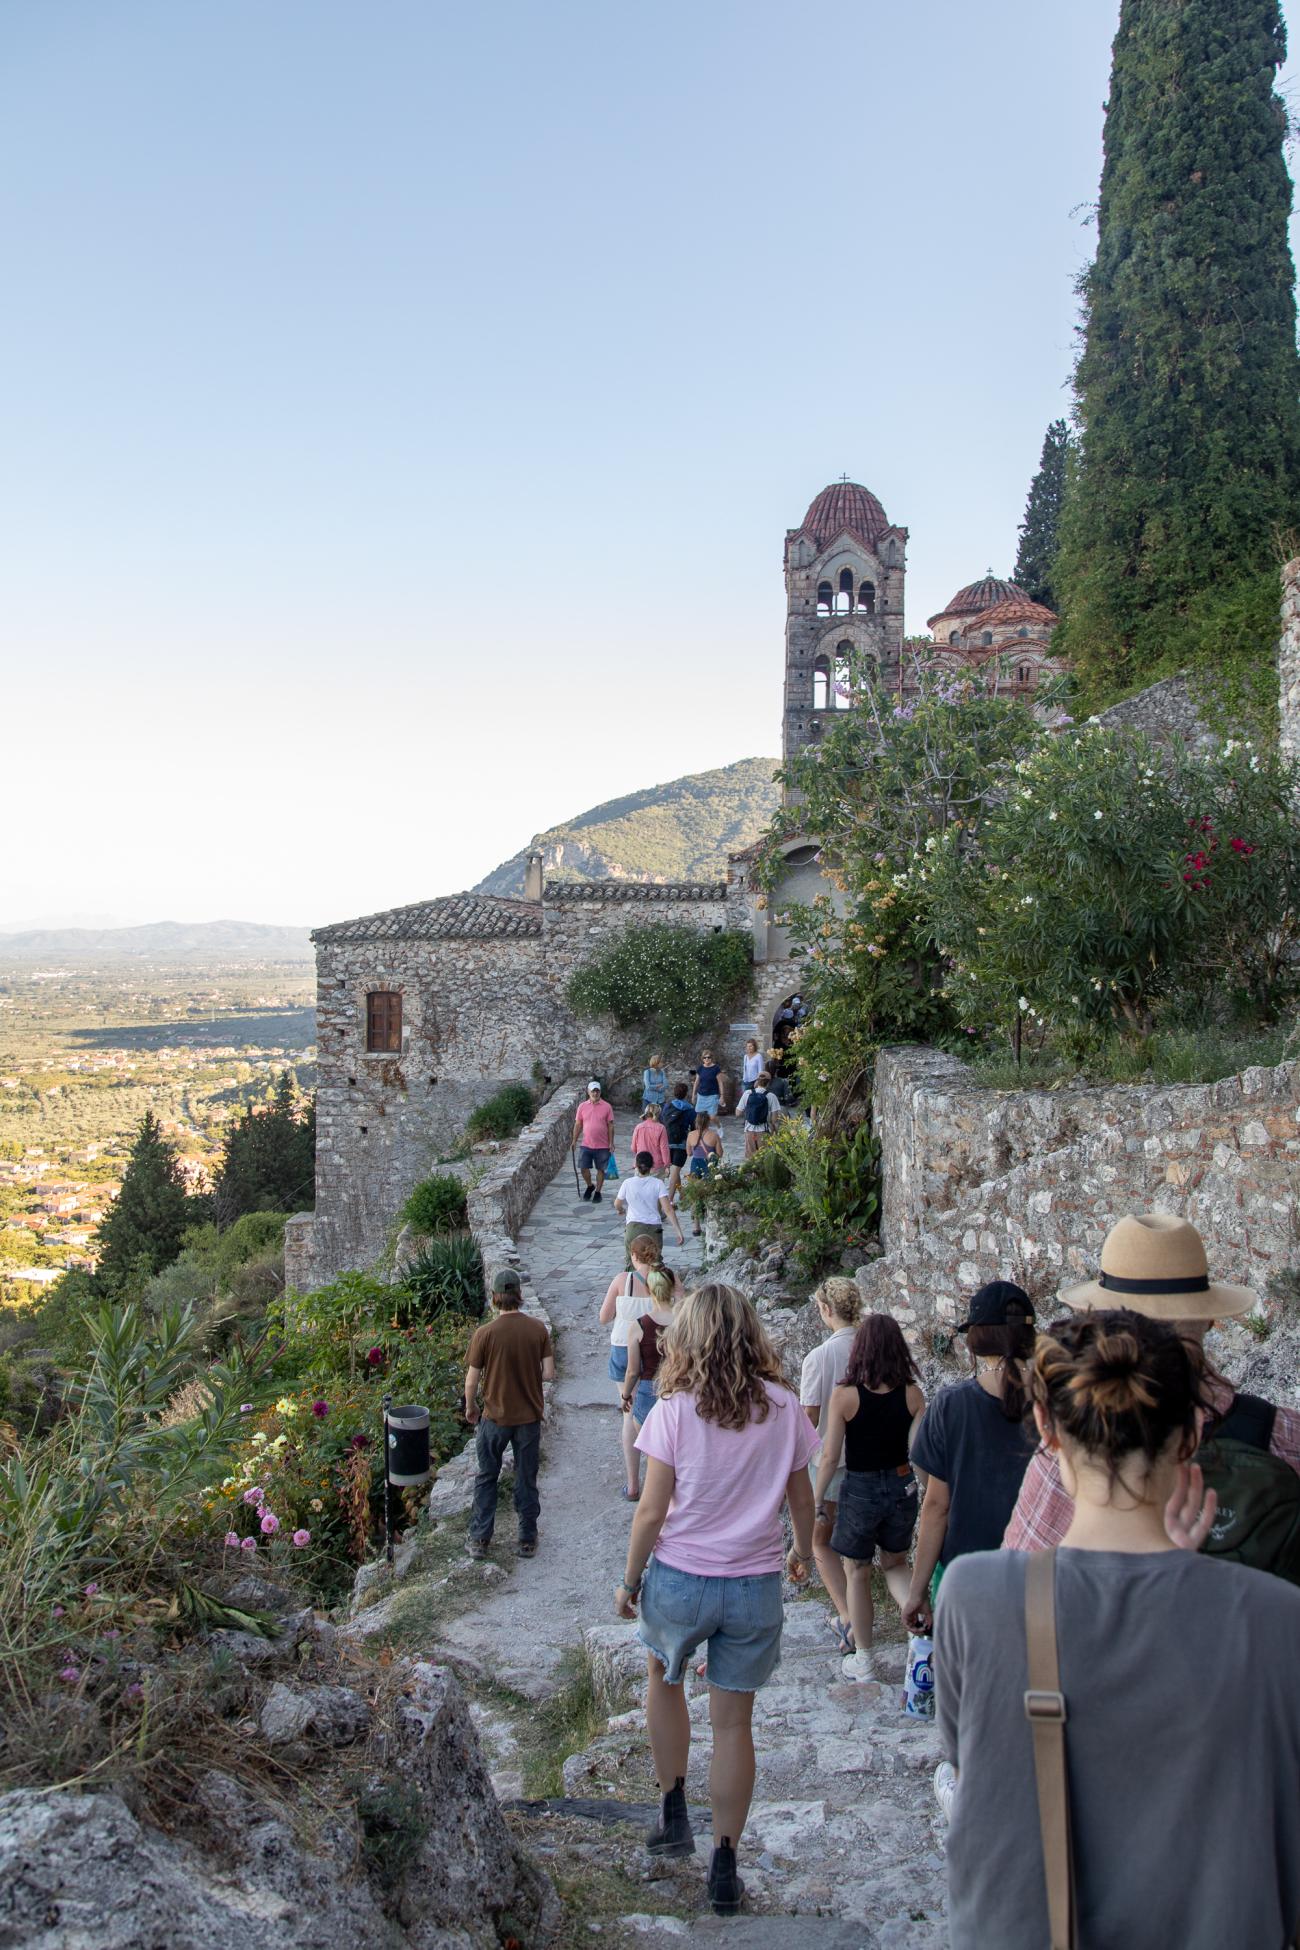 Pantanassa Monastery in the ancient town of Mystras